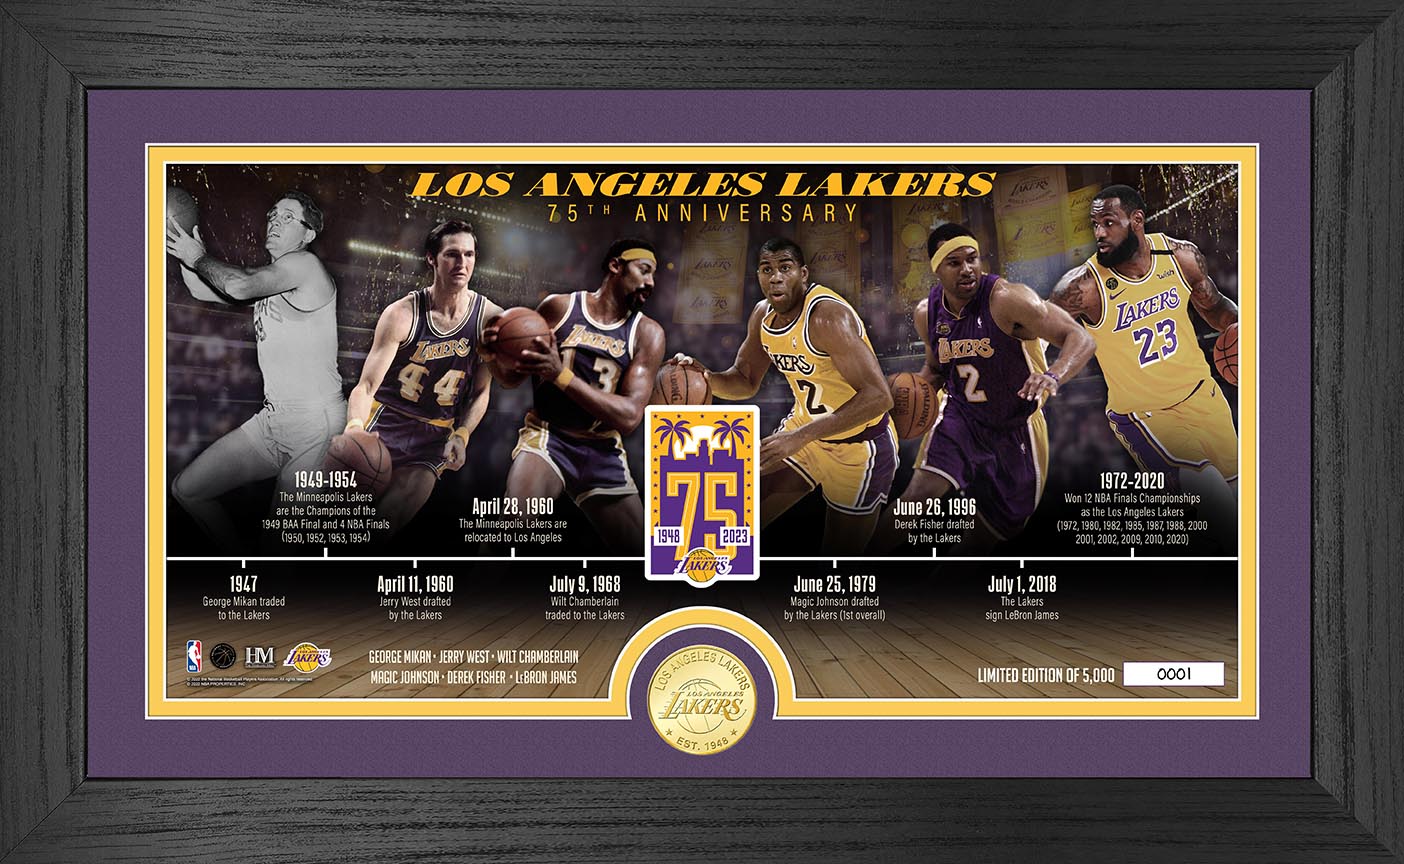 Los Angeles Lakers 75th Anniversary Panoramic Timeline Bronze Coin Photo Mint